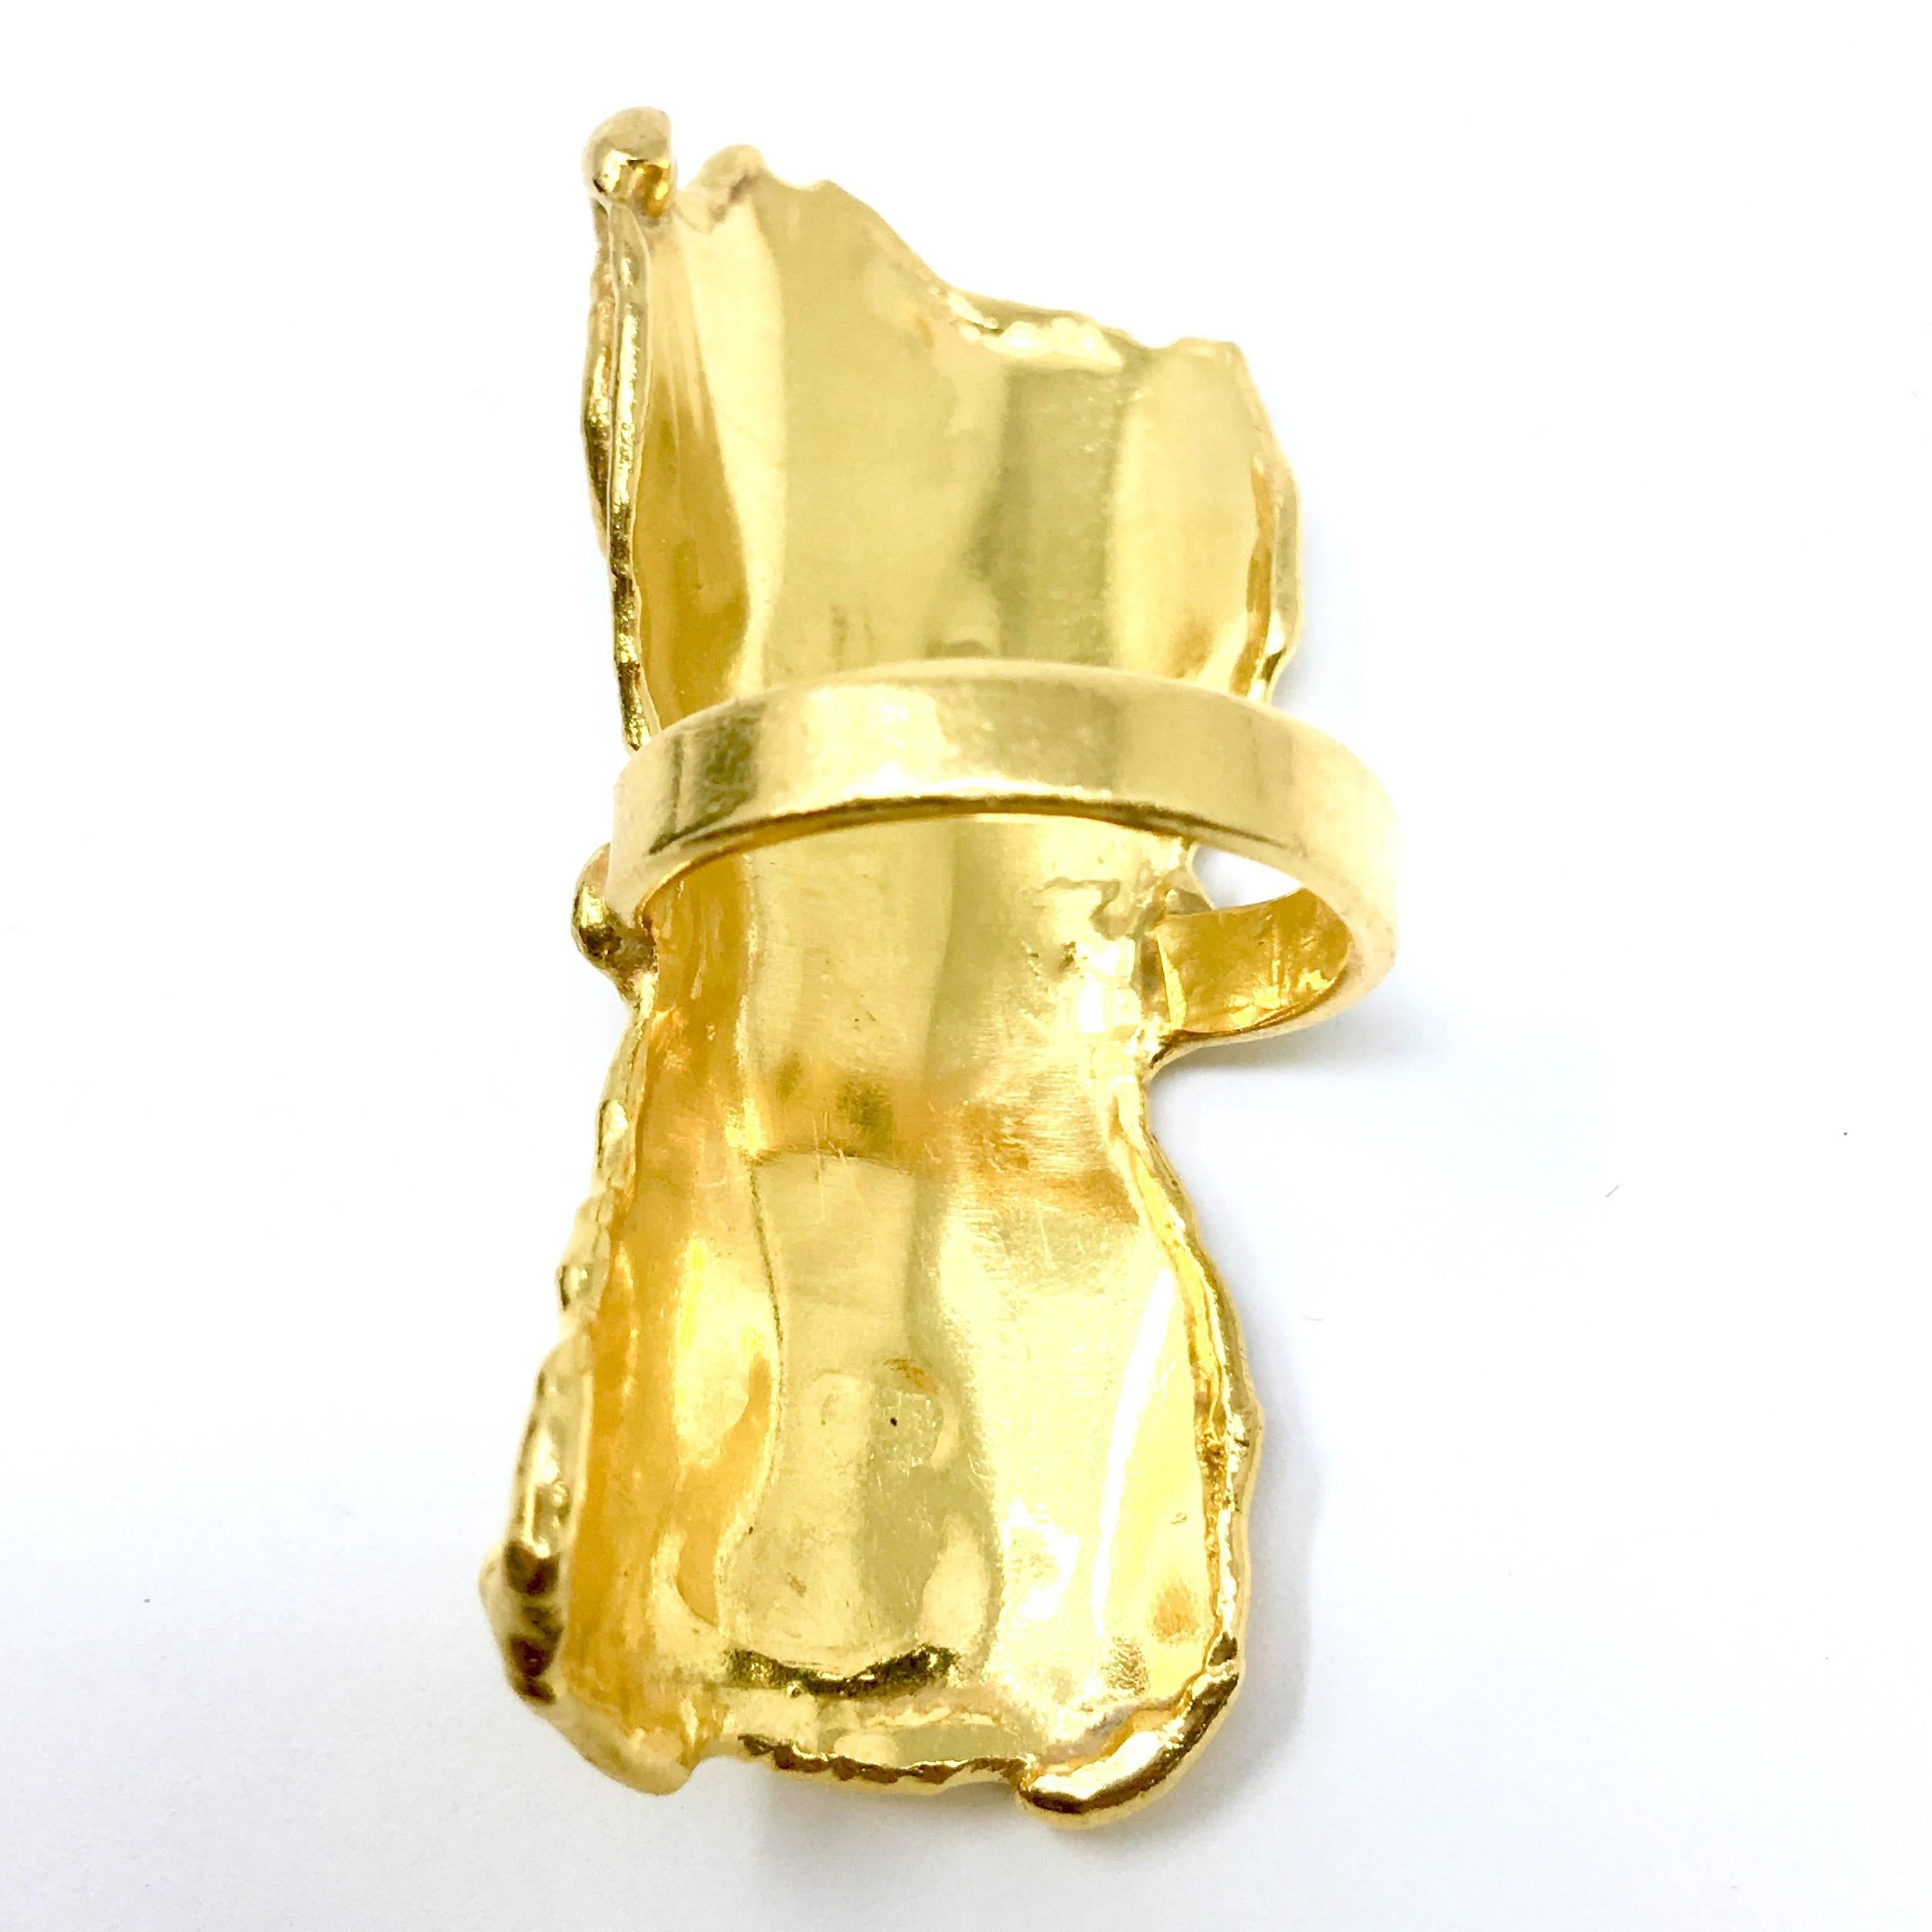 A Jean Mahie creation. 22K yellow gold sculpture ring, signed Jean Mahie. Size 5.5